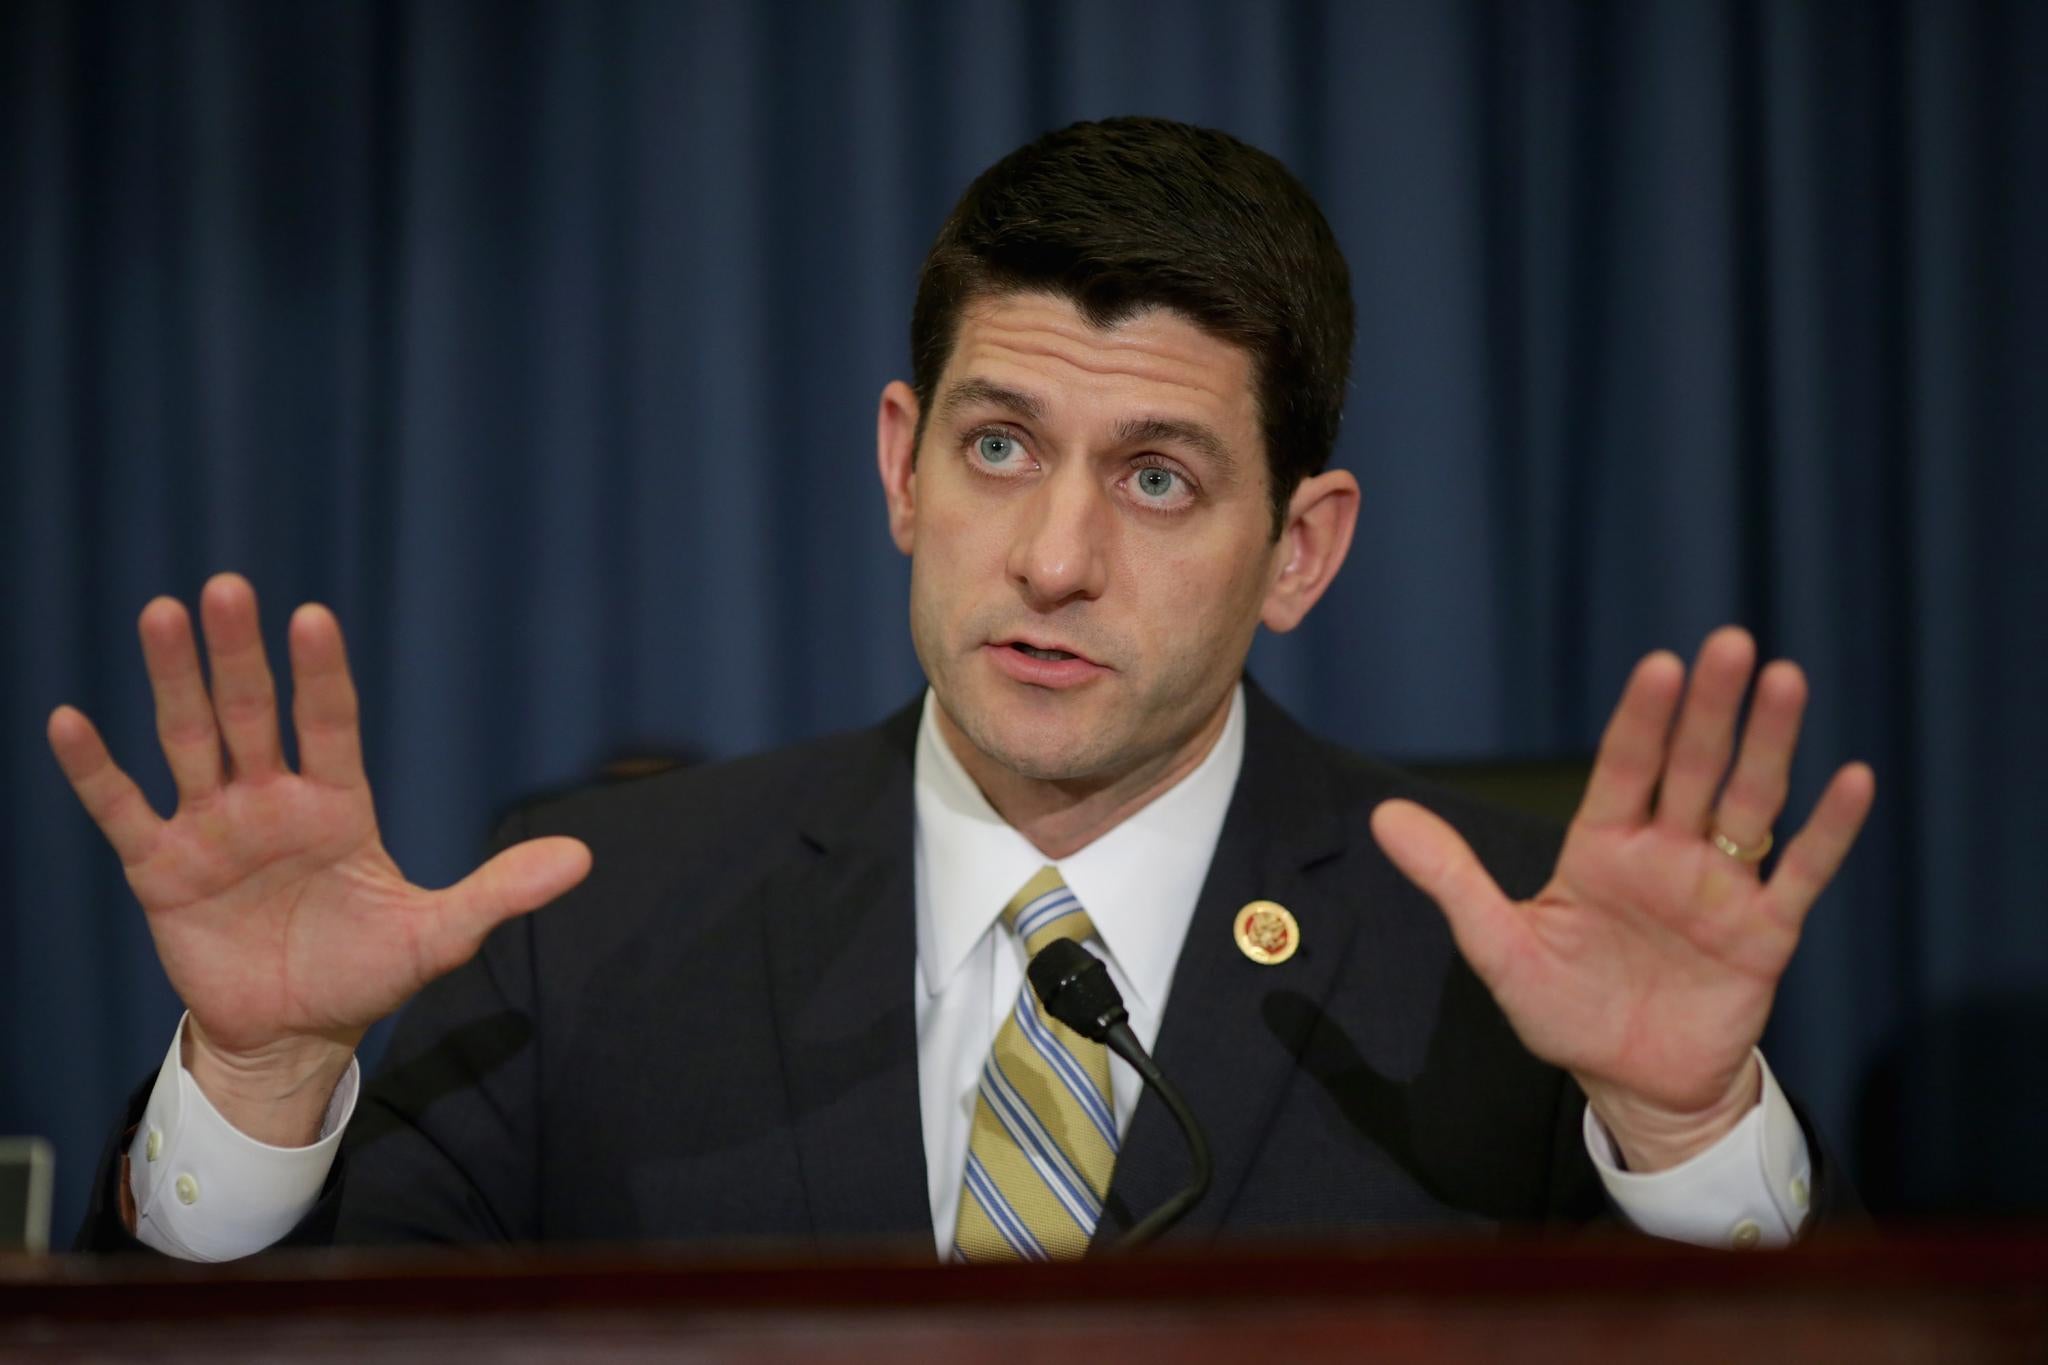 A Closer Look At Paul Ryan’s Statement on Lazy ‘Inner City’ Men